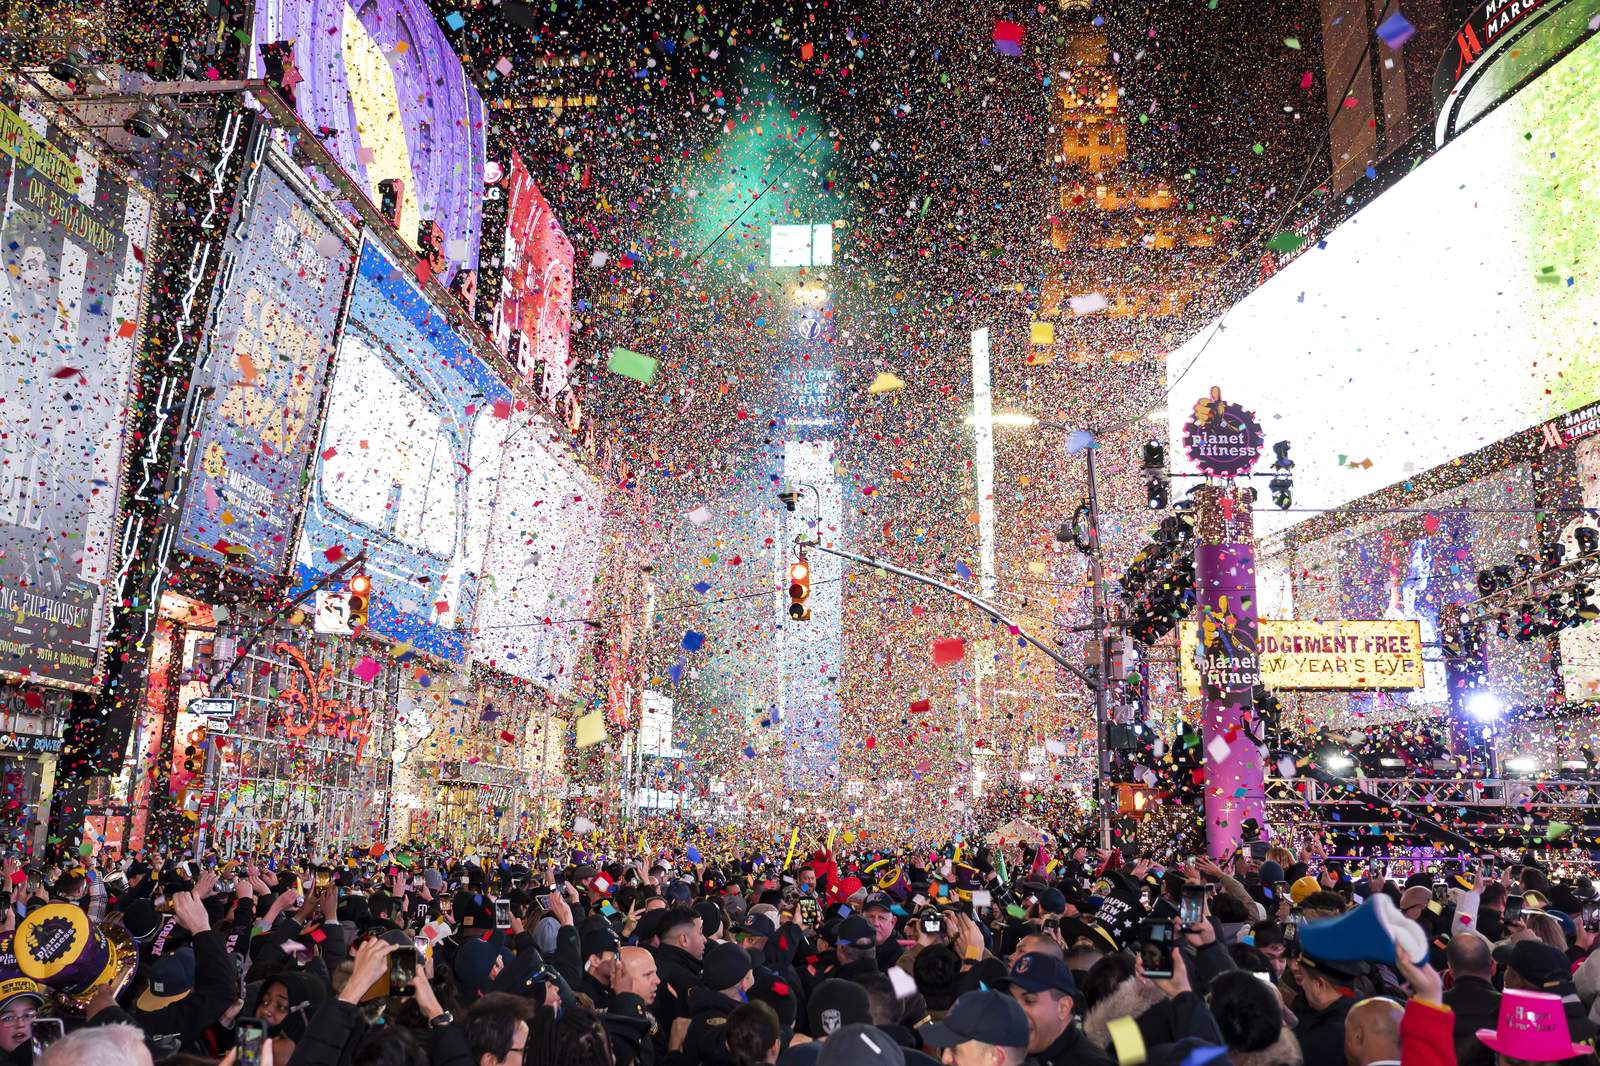 After a year like this, expect a strange New Year's Eve